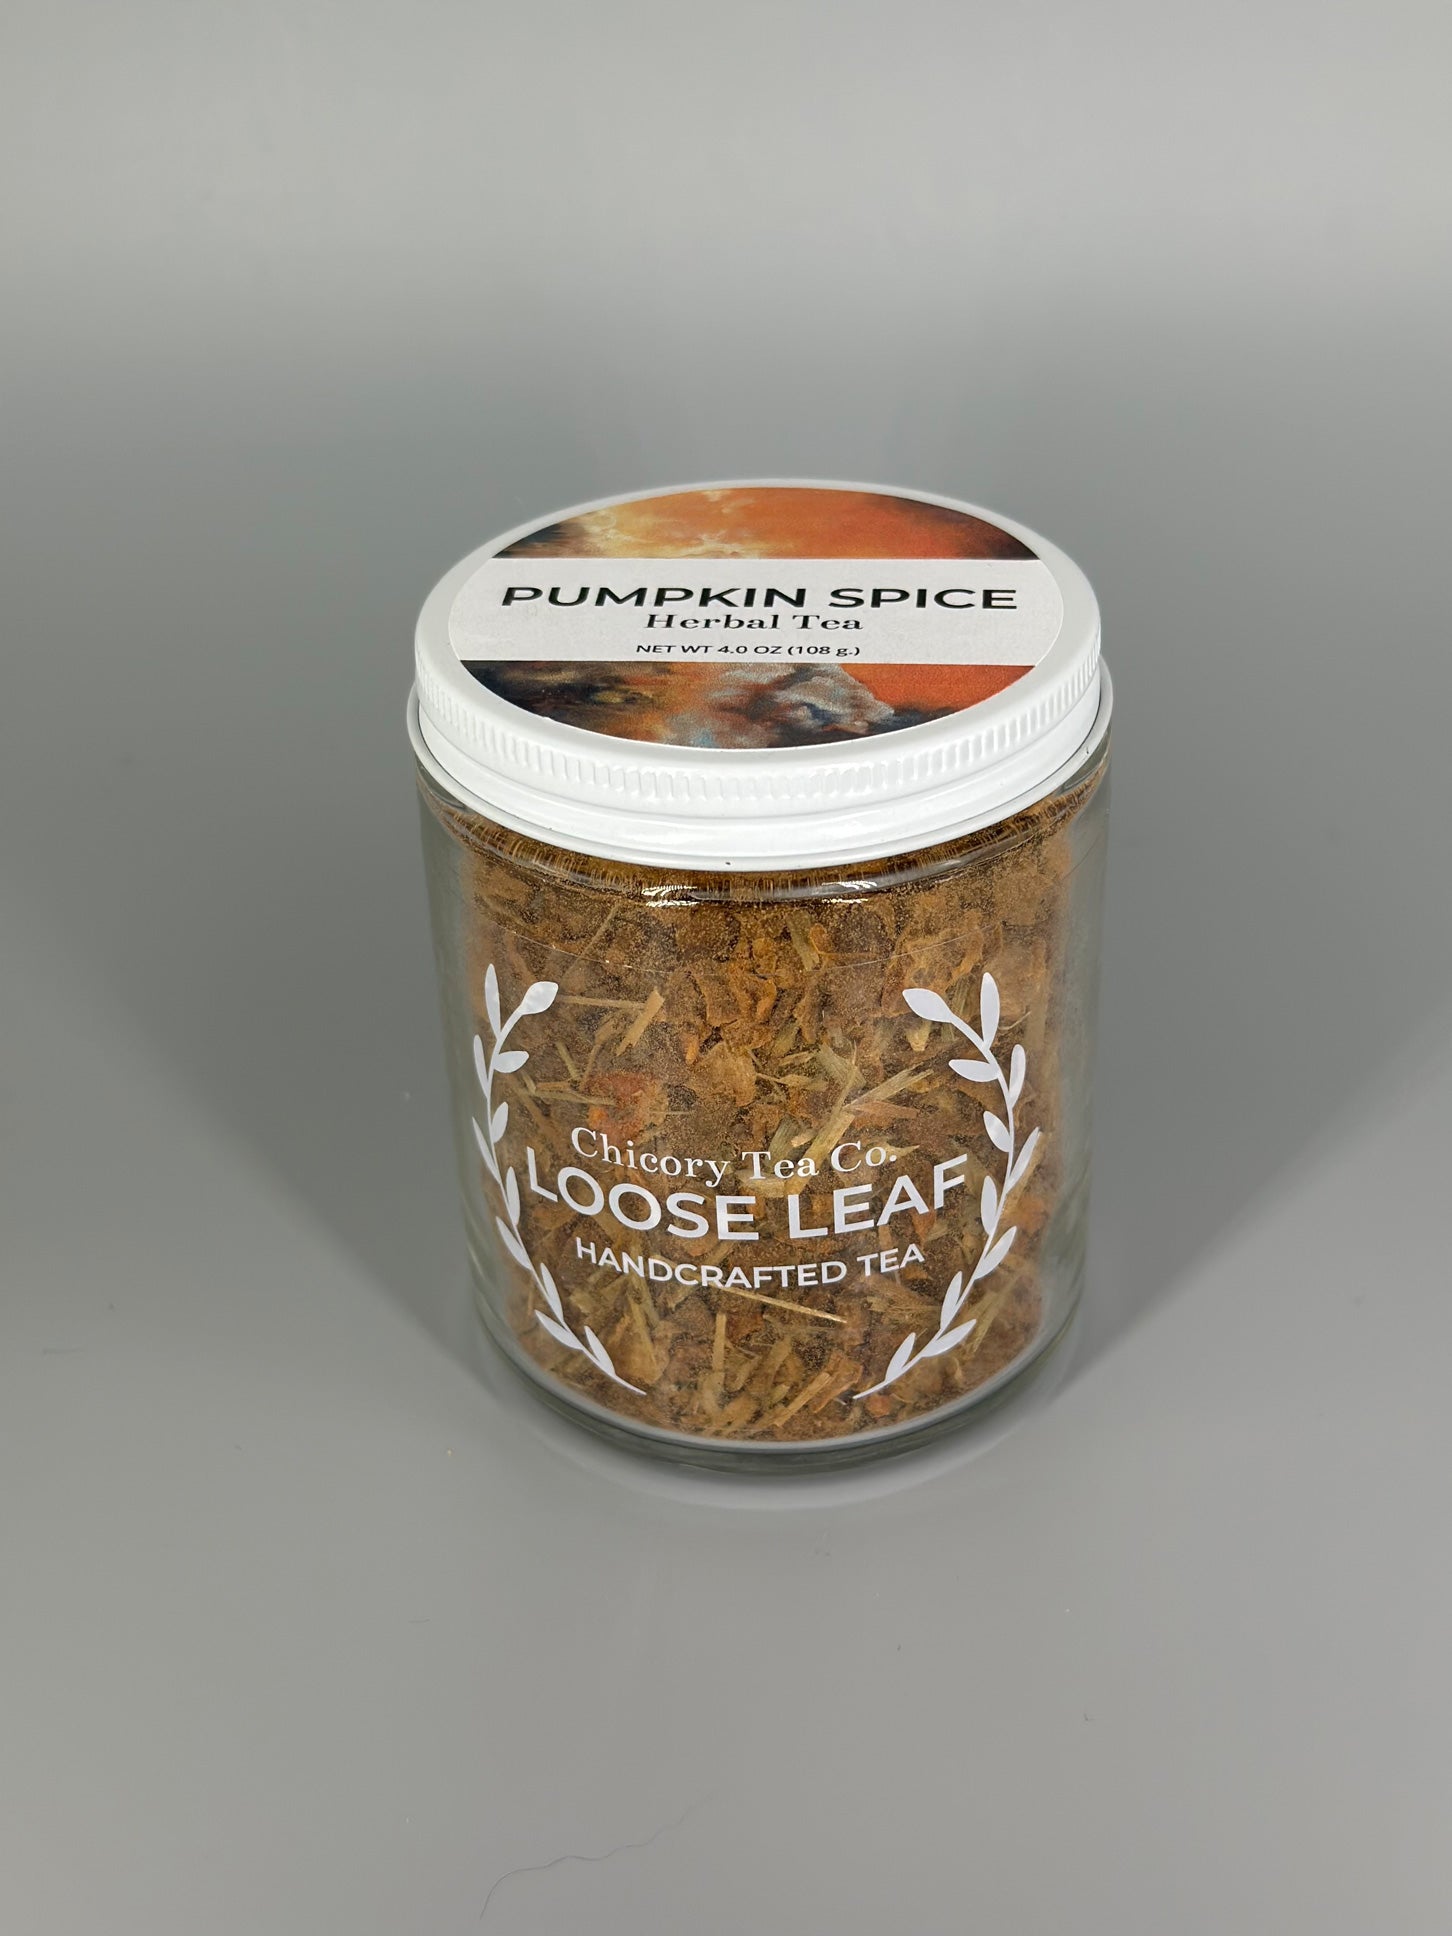 Chicory Tea Co.'s Pumpkin Spice Herbal Tea in the jar, view from front